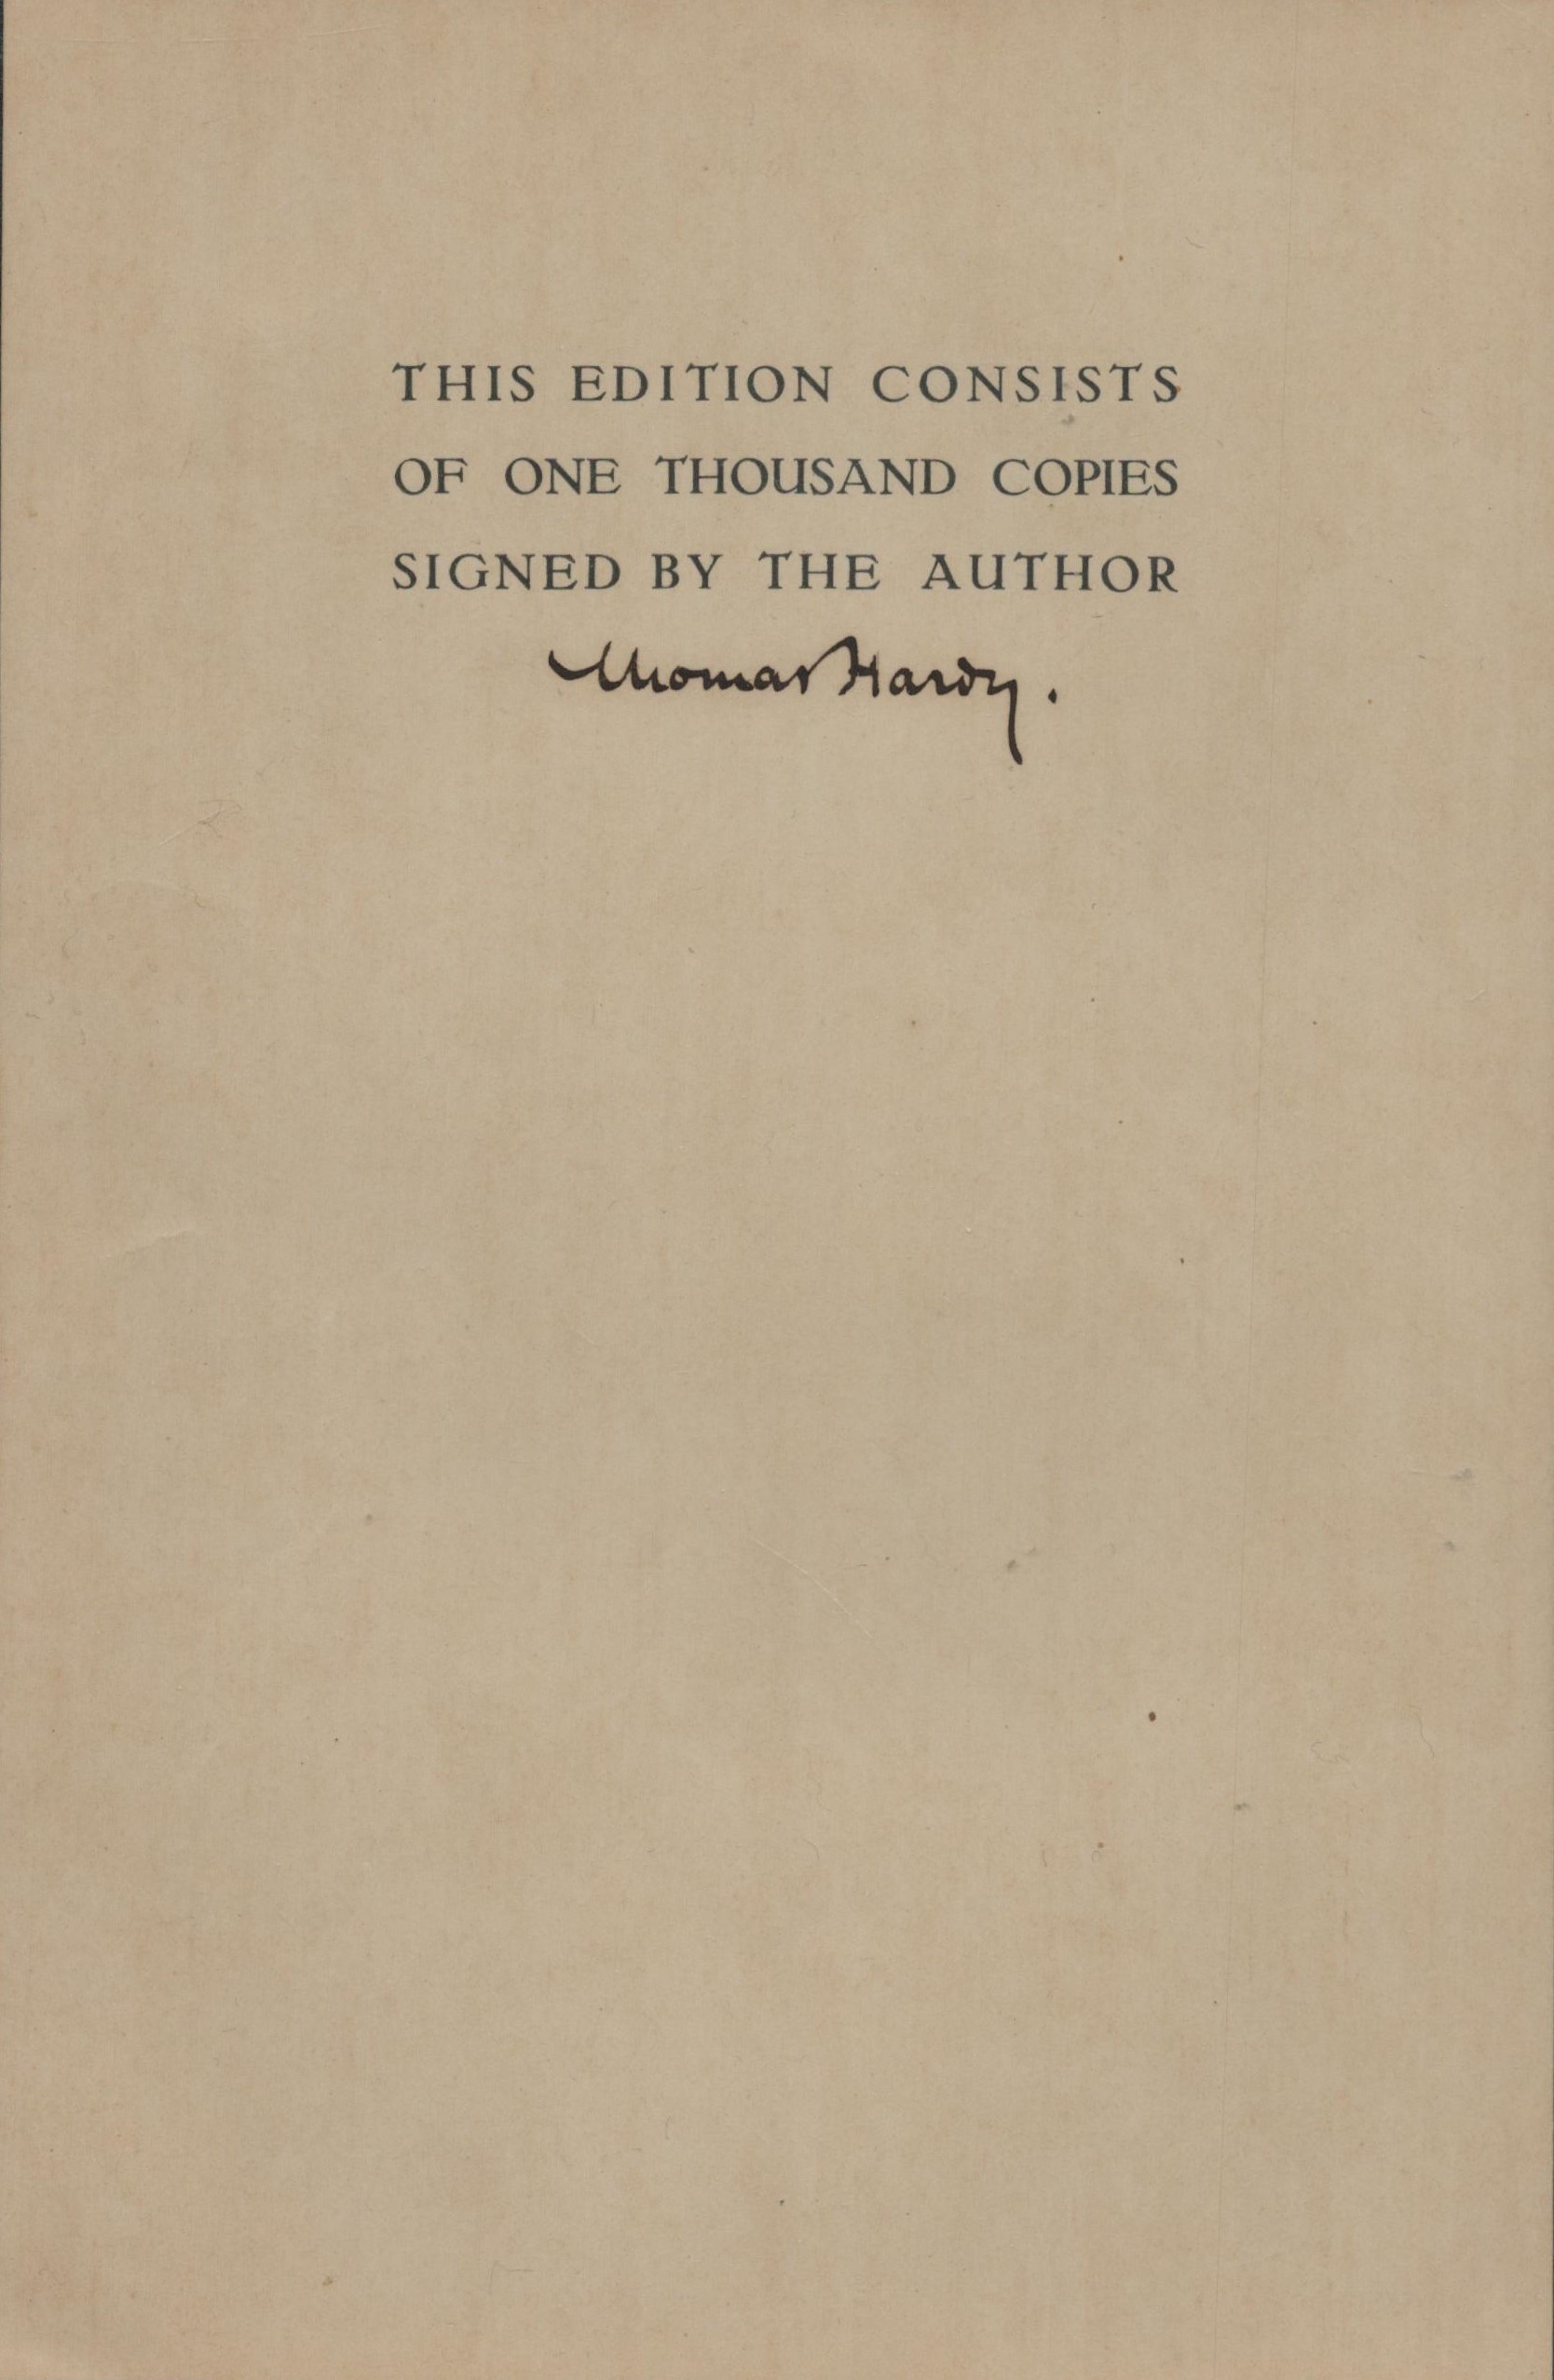 Thomas Hardy signed 9x6 inch loose book page. Good Condition. All autographs come with a Certificate